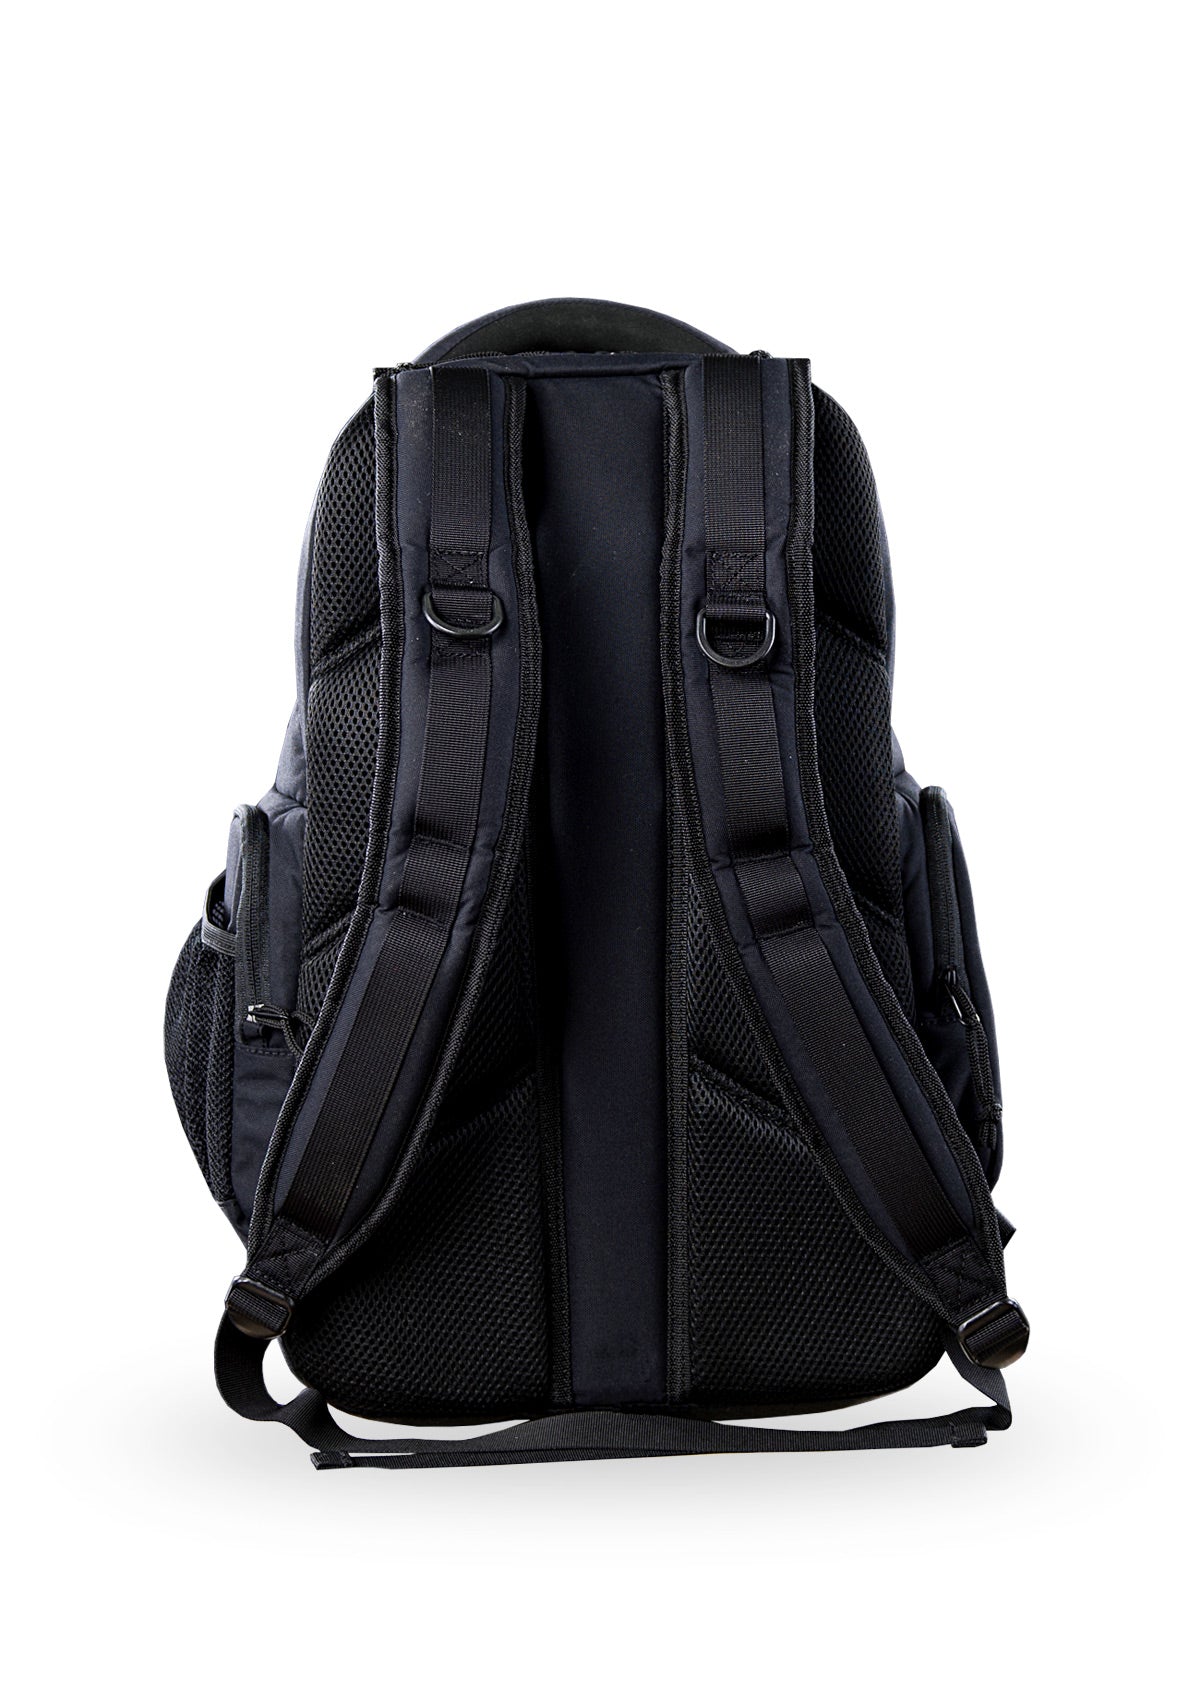 needessentials Day Pack travel backpack adventure